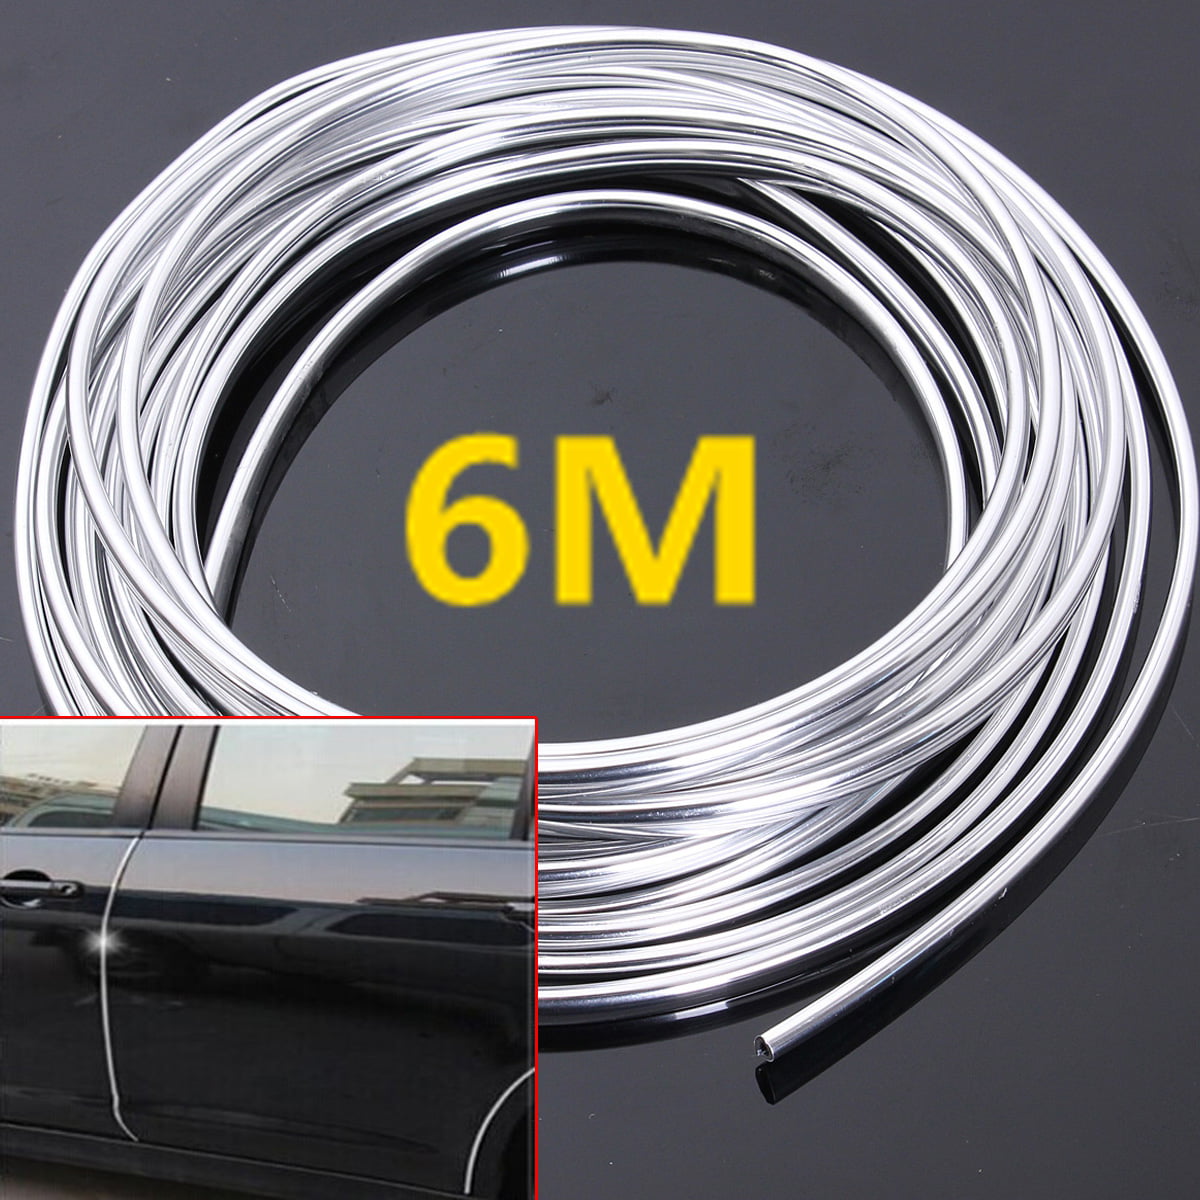 20 meter 40mm Chrome Car Styling Moulding Strip Trim Adhesive in roll